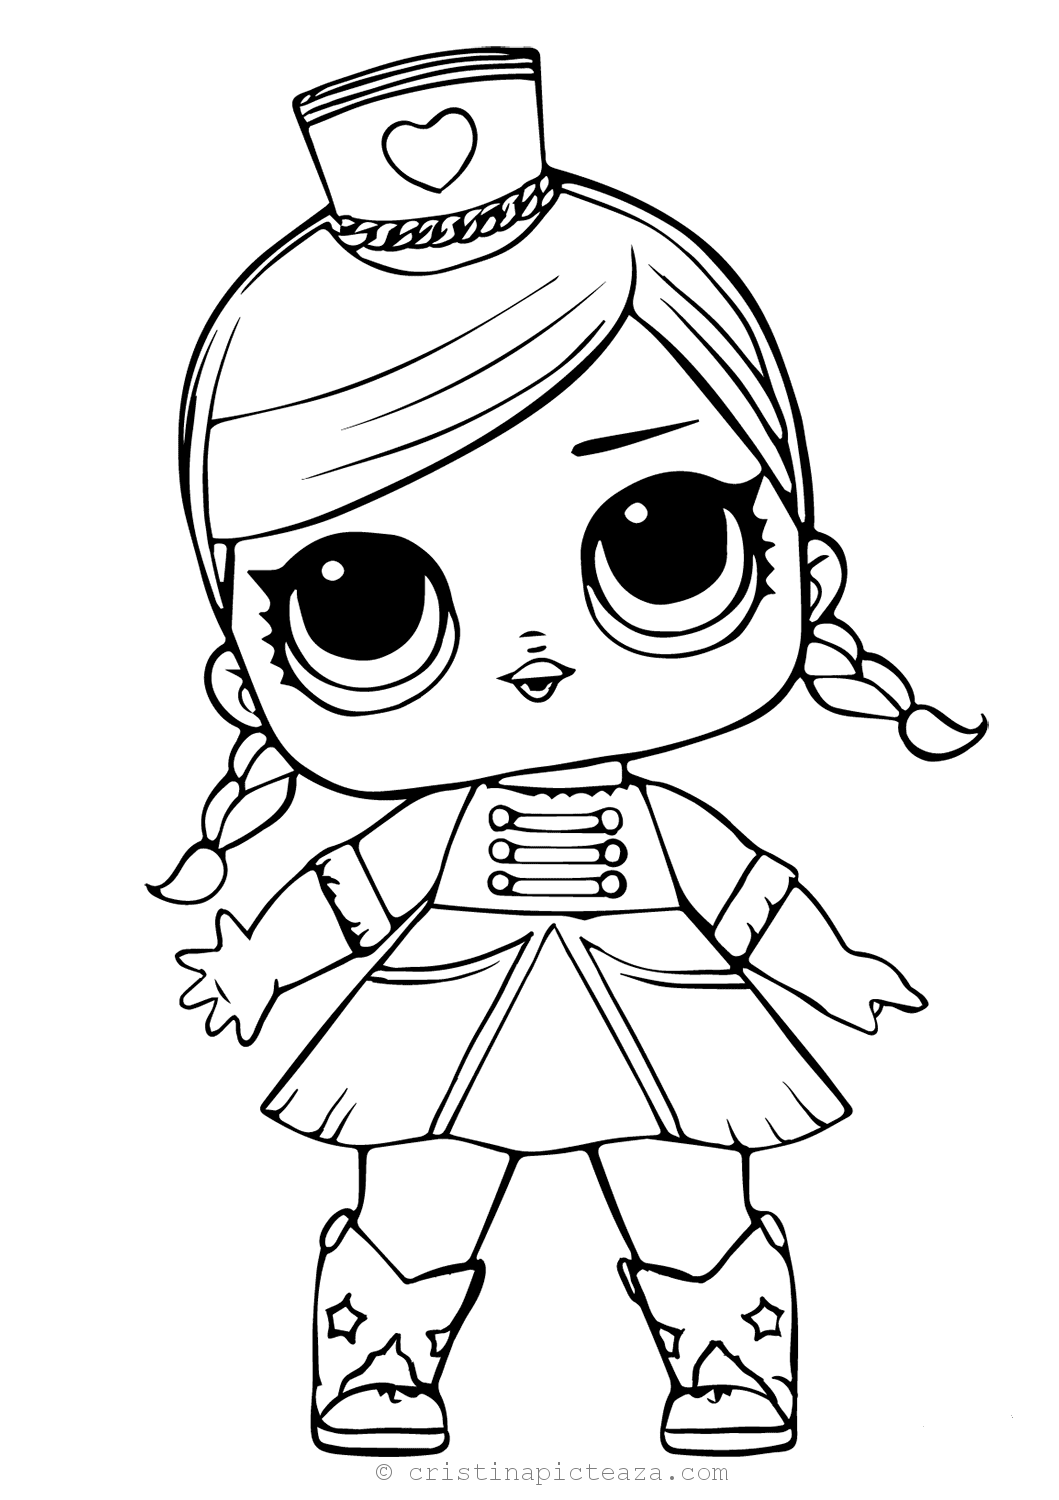 dolls coloring pages lol coloring pages lol dolls for coloring and painting coloring dolls pages 